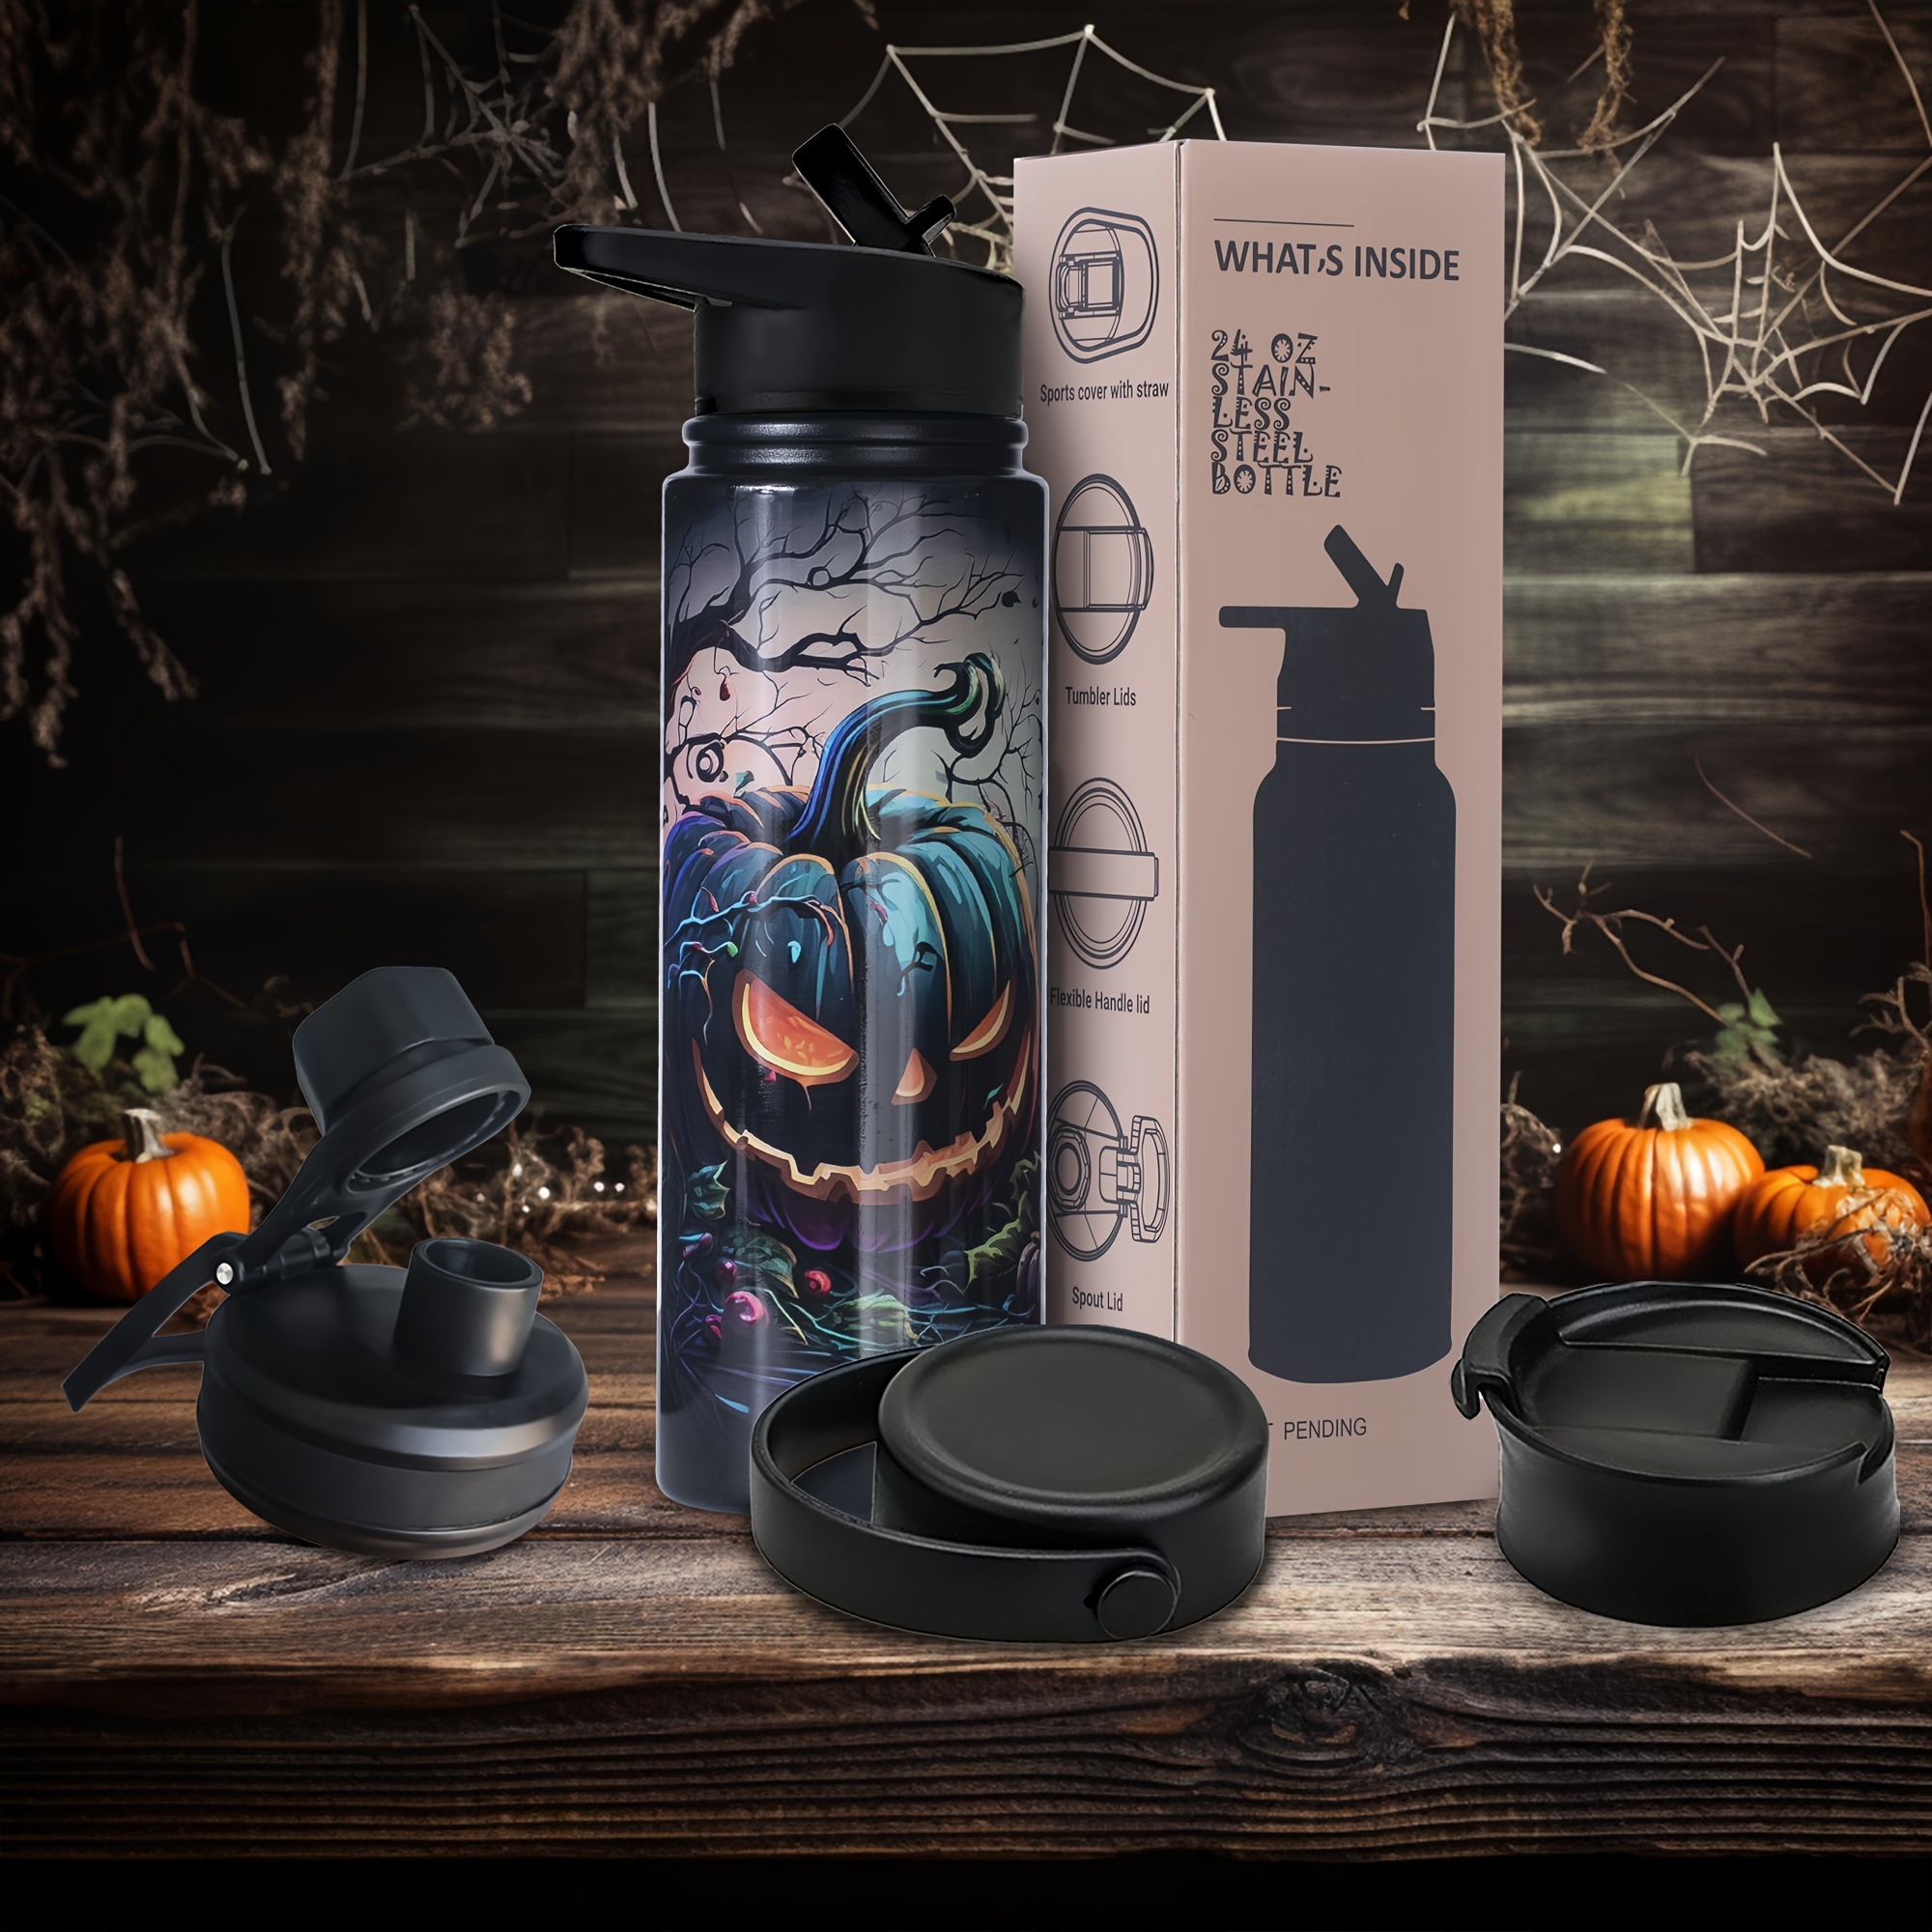 

Halloween Water Bottle With Grimace - 24 Oz Insulated Cups With Straws And 4 Lids, Halloween Tumbler Gifts For Friends Kids, Made Of Stainless Steel, The Gram Weight Is 1.22lb.